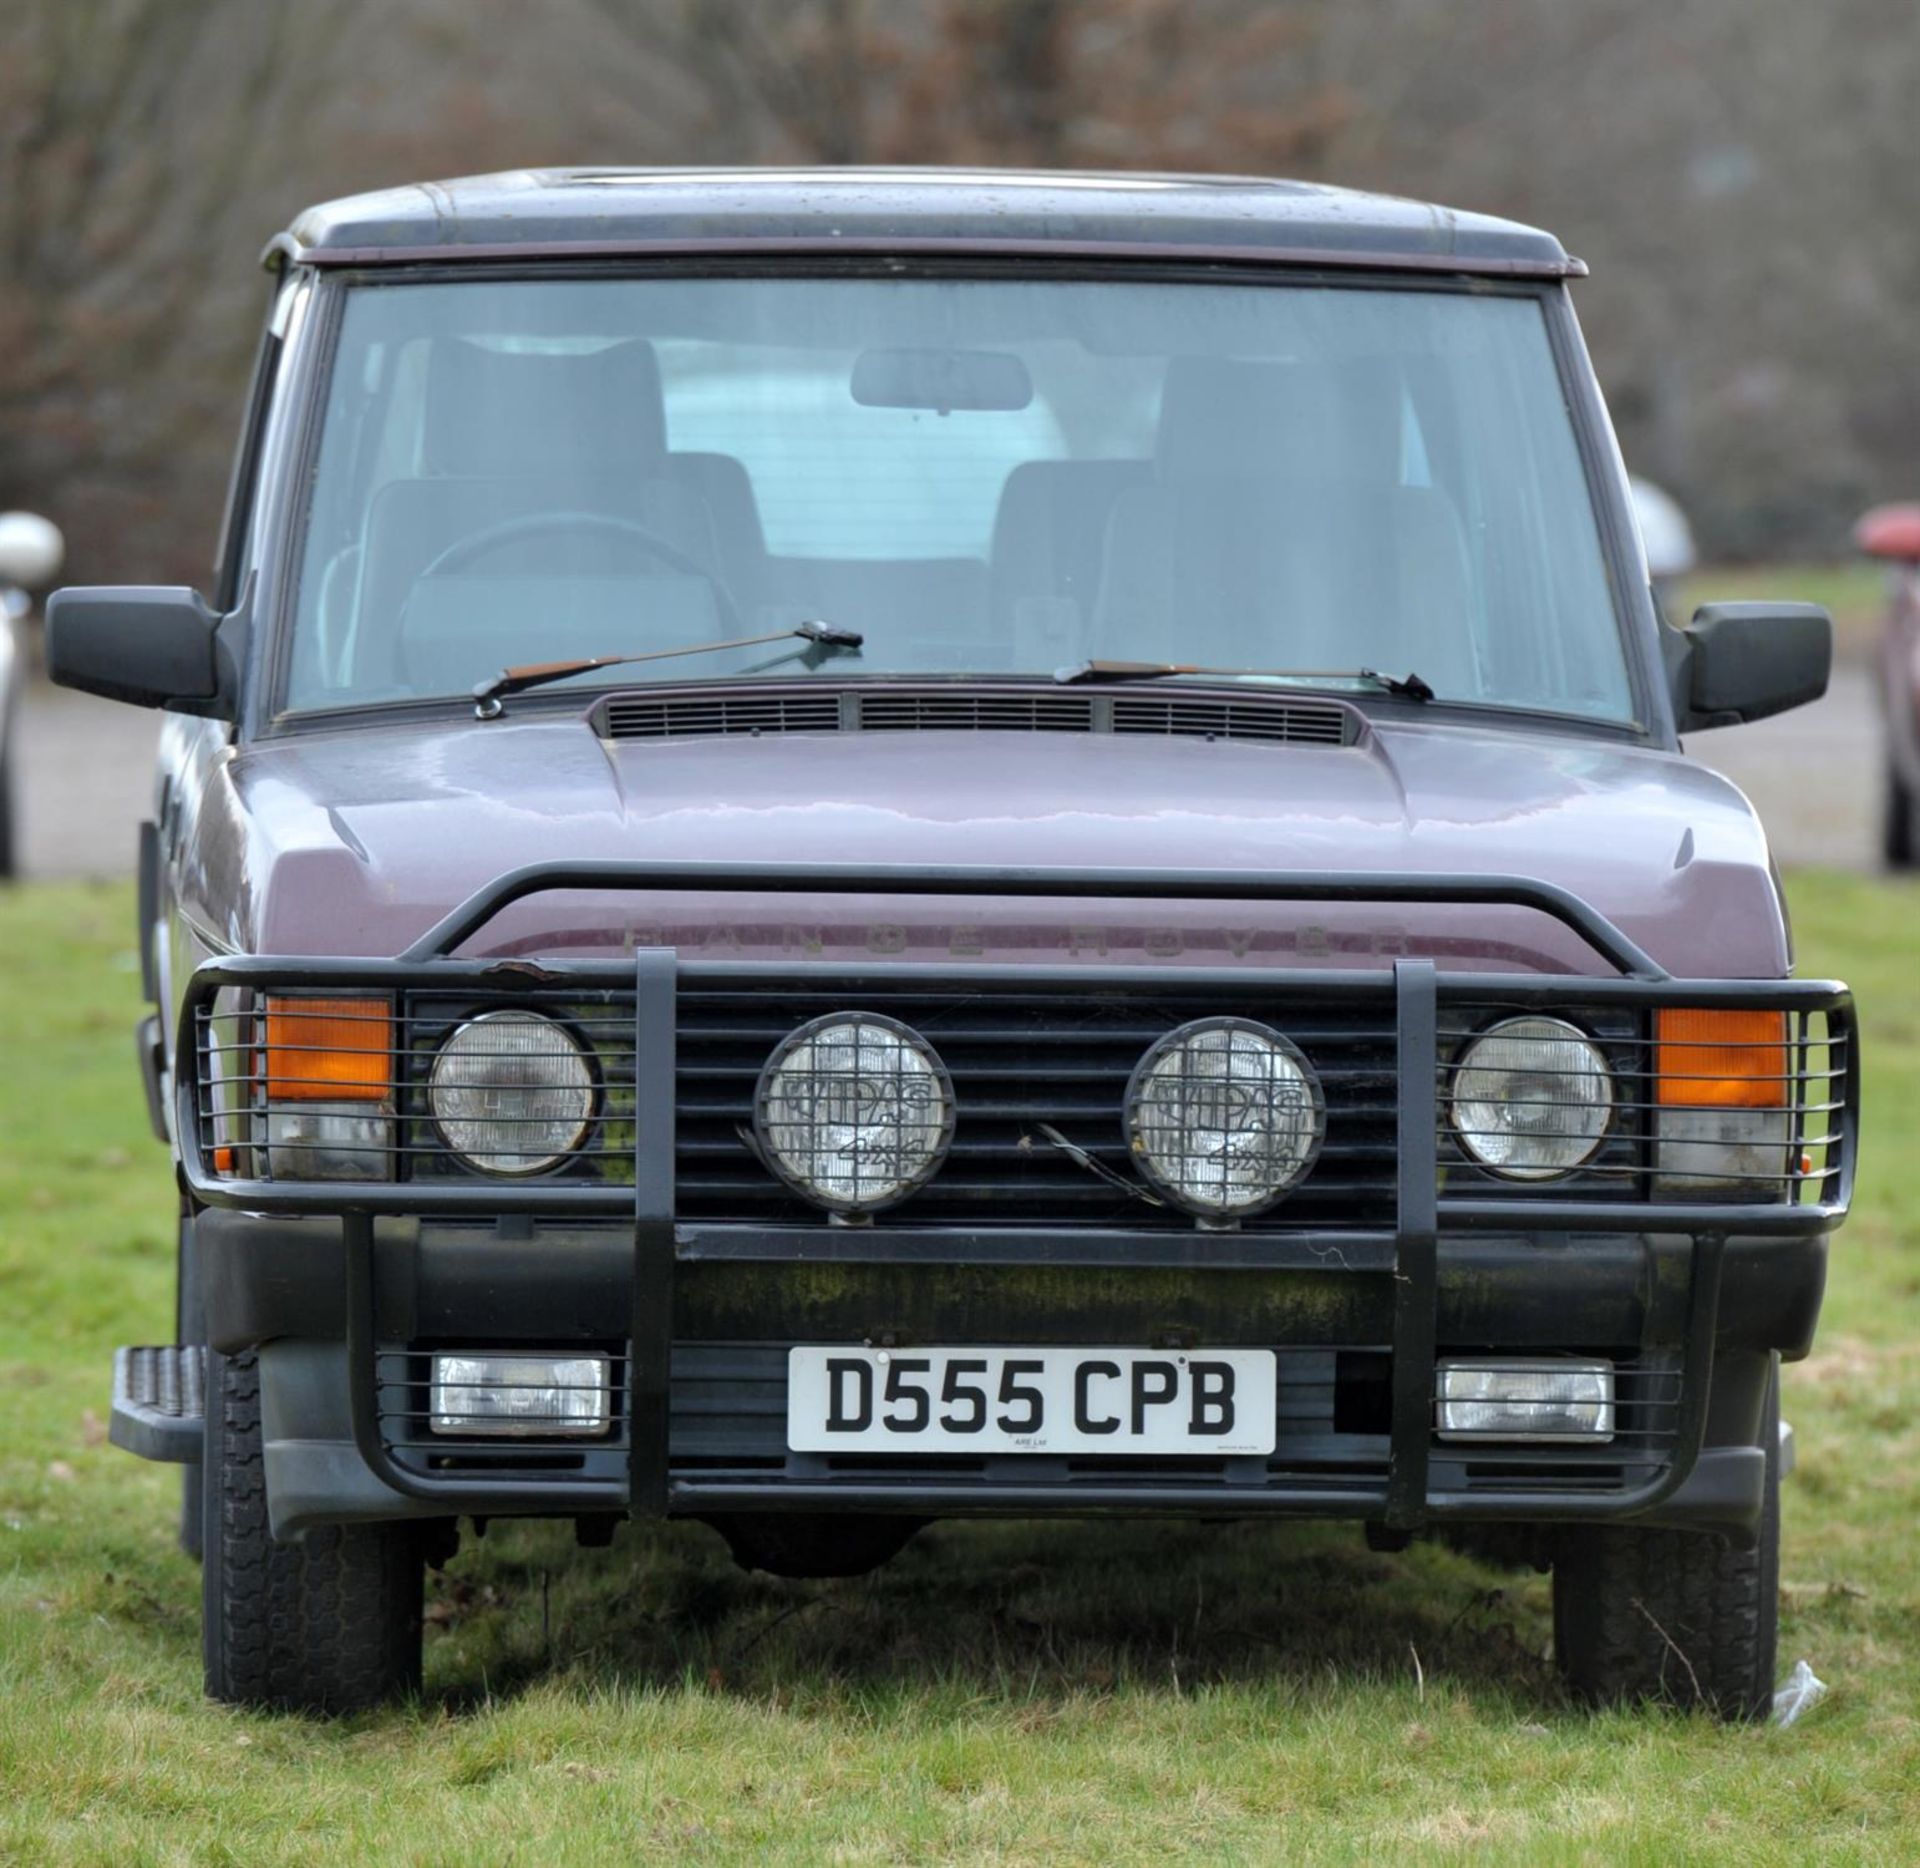 Range Rover Vogue V8 EFI in brown. Registration D555 CPB. Manual gearbox. Currently a non starter. - Image 4 of 15